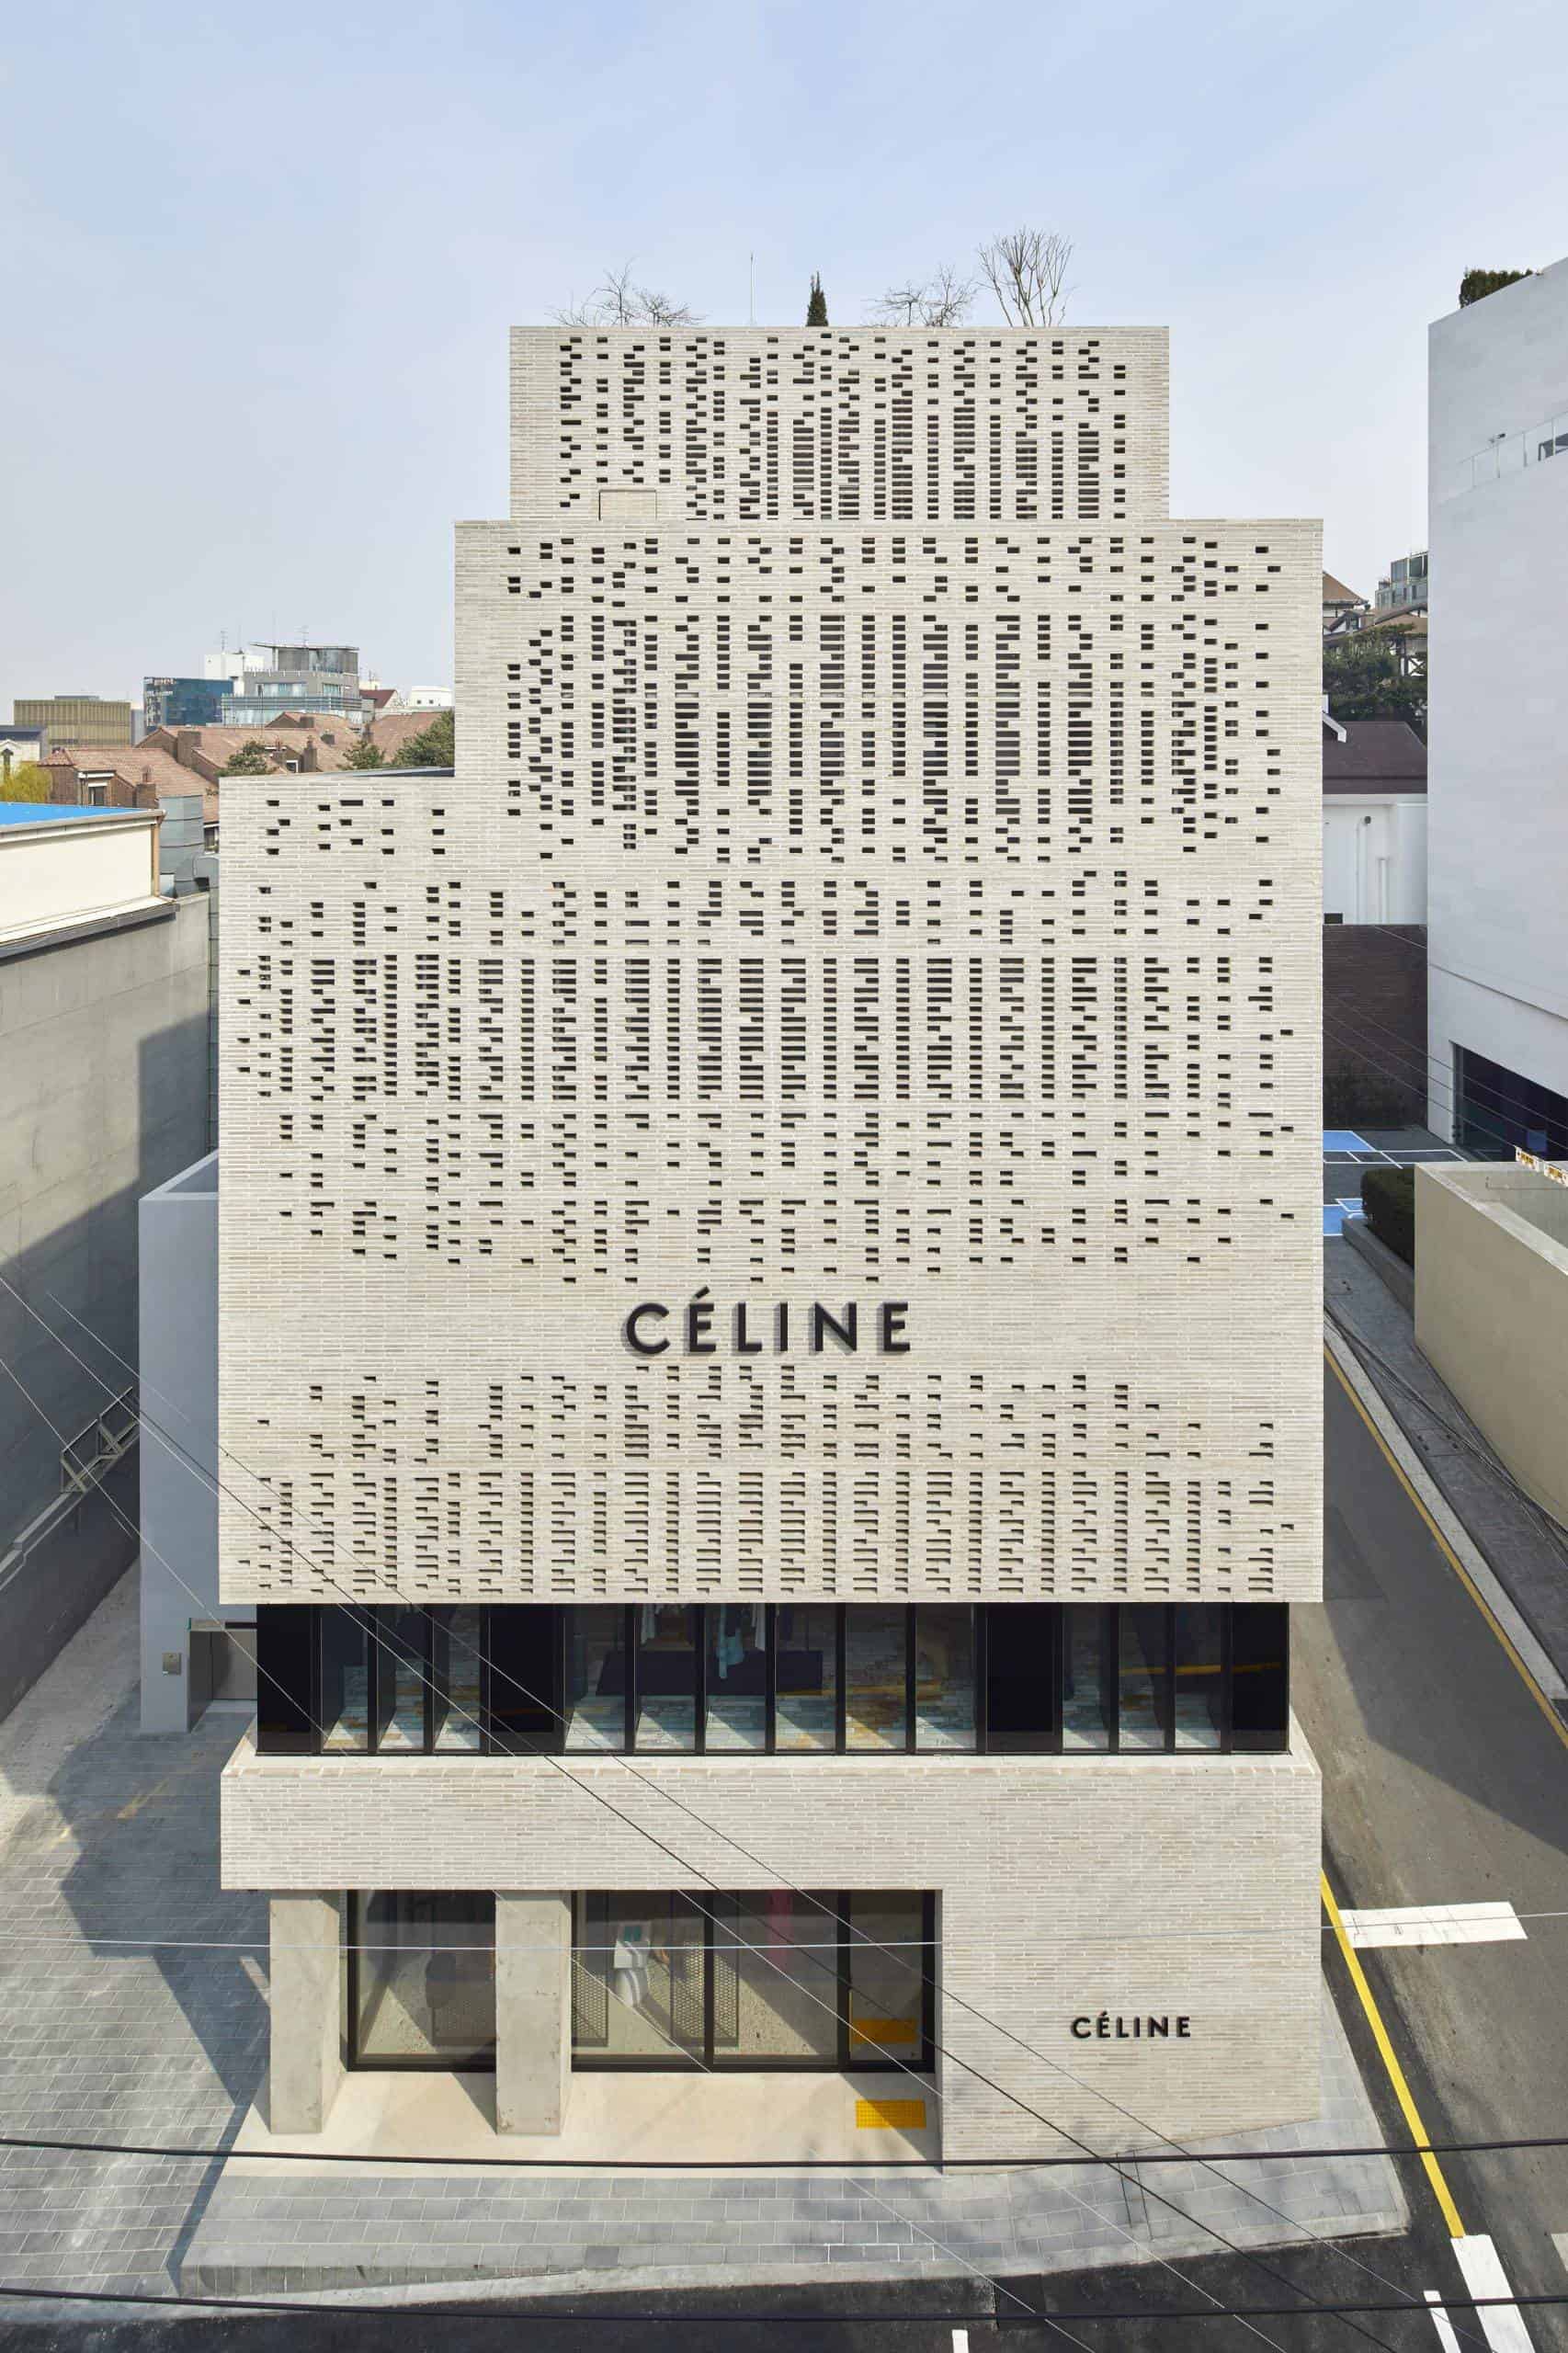 Exterior view of the celine flagship store, a modern urban building with a patterned facade and bold signage, situated between other structures.